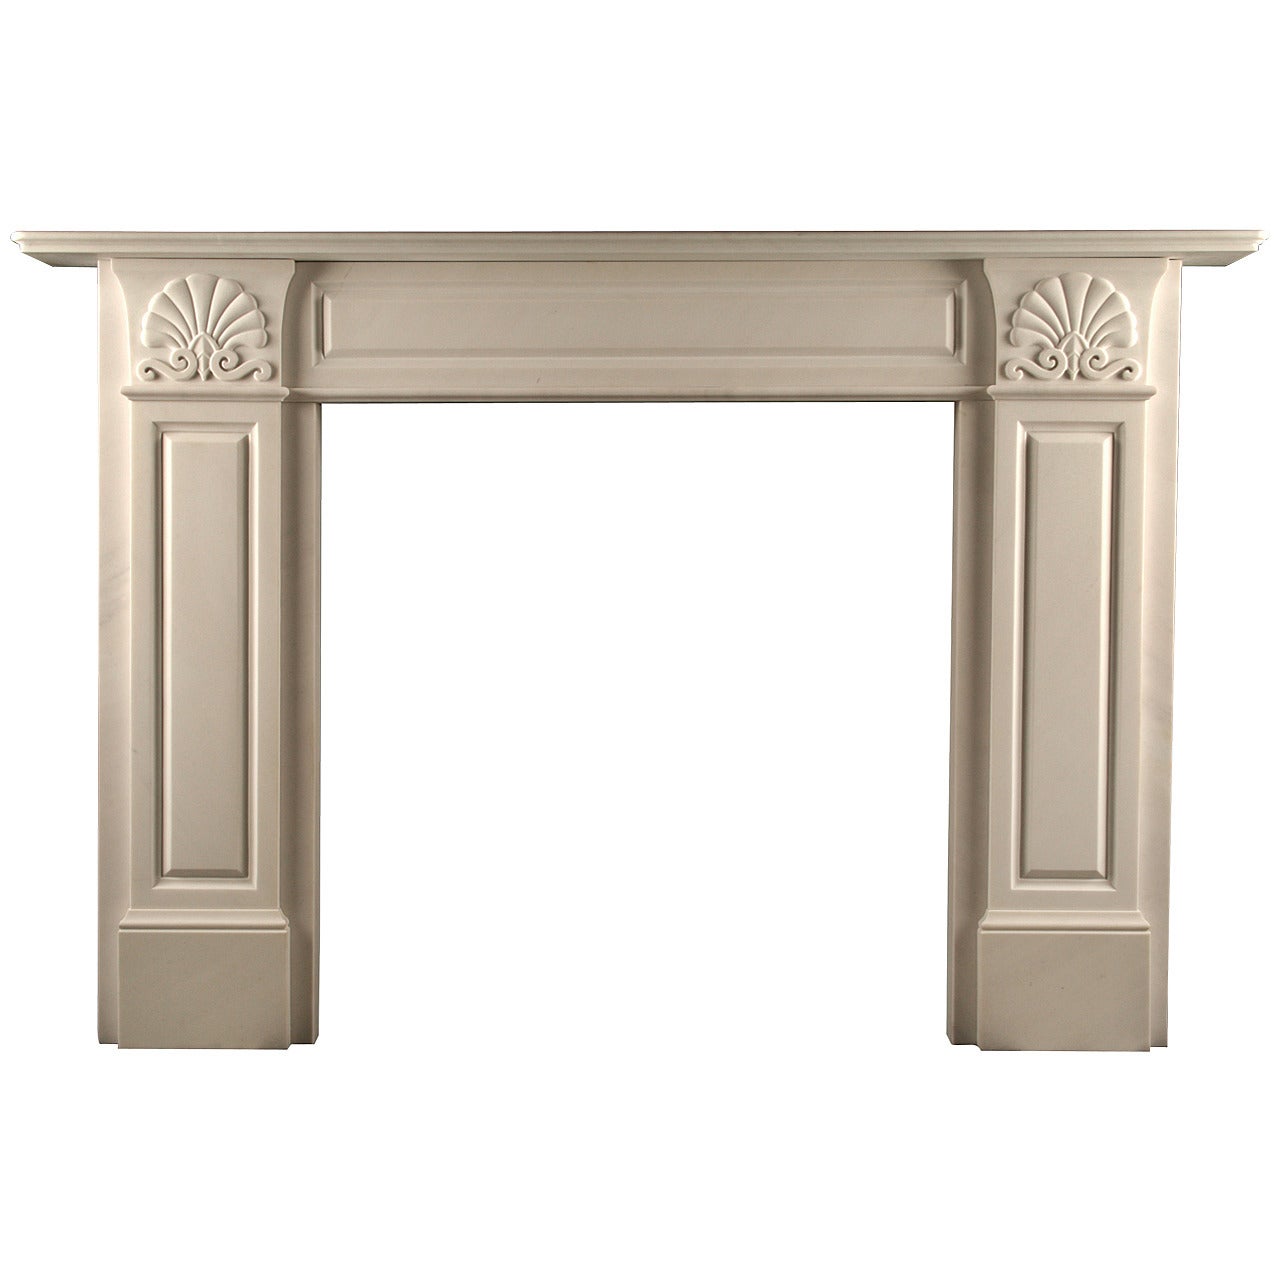 A Grand Regency Fireplace Mantel in White Statuary Marble For Sale